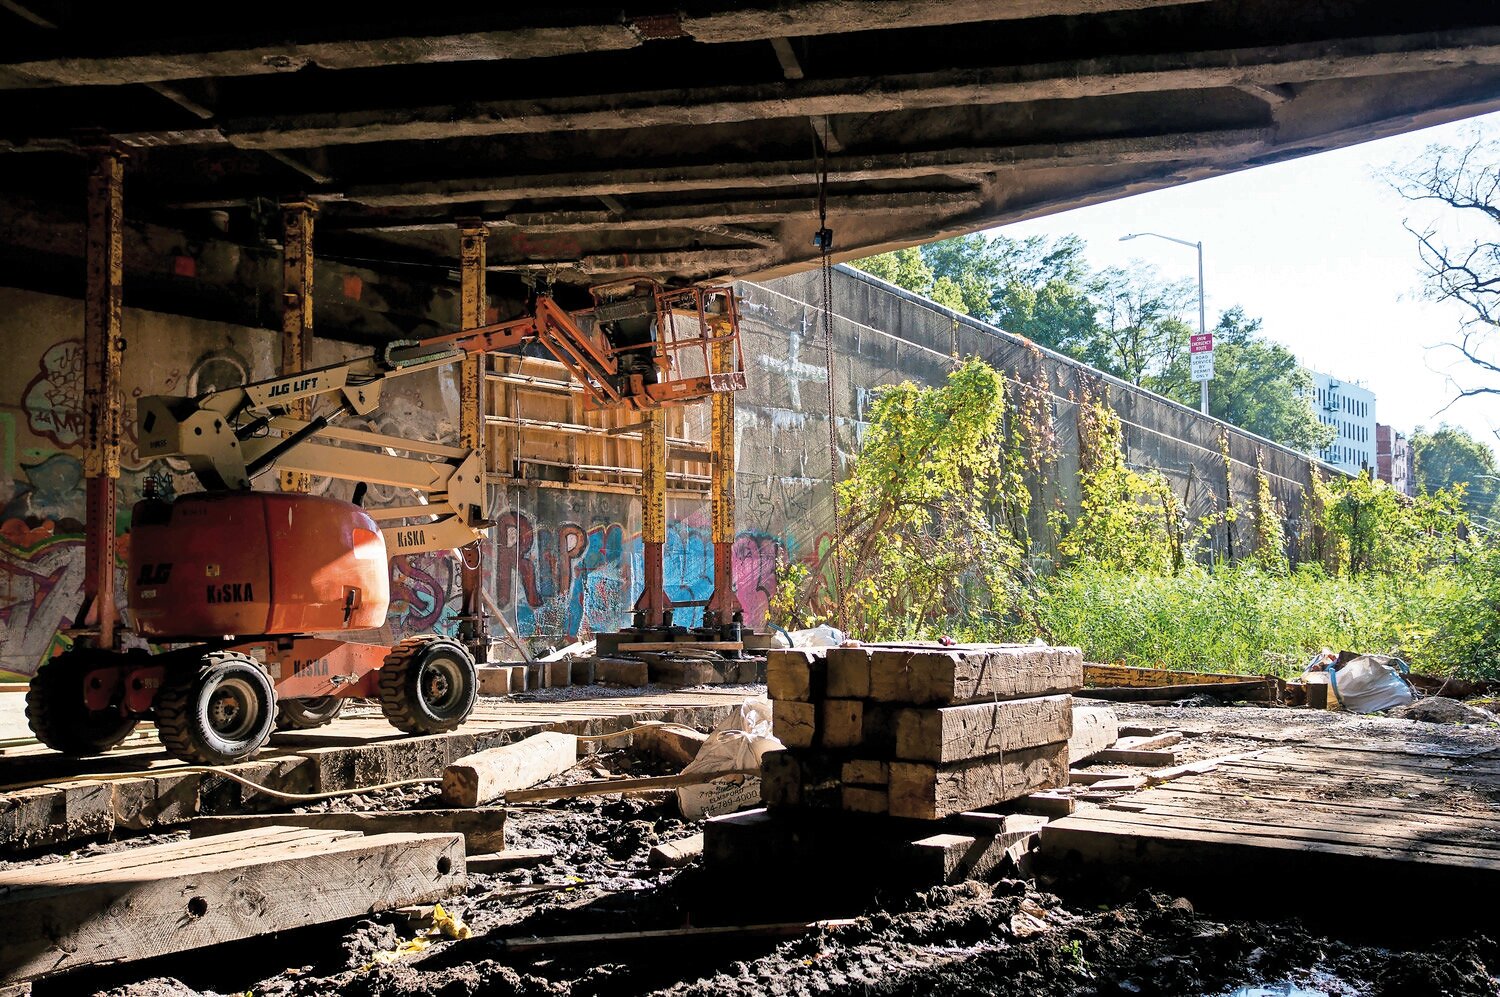 After years of waiting, CSX Transportation removed decades of trash and debris from what was once its Putnam Line tracks along the Major Deegan Expressway. City officials now hope to turn this stretch of land into not only a linear park through the Kingsbridge business district, but also a return of the now-underground Tibbett Brook.